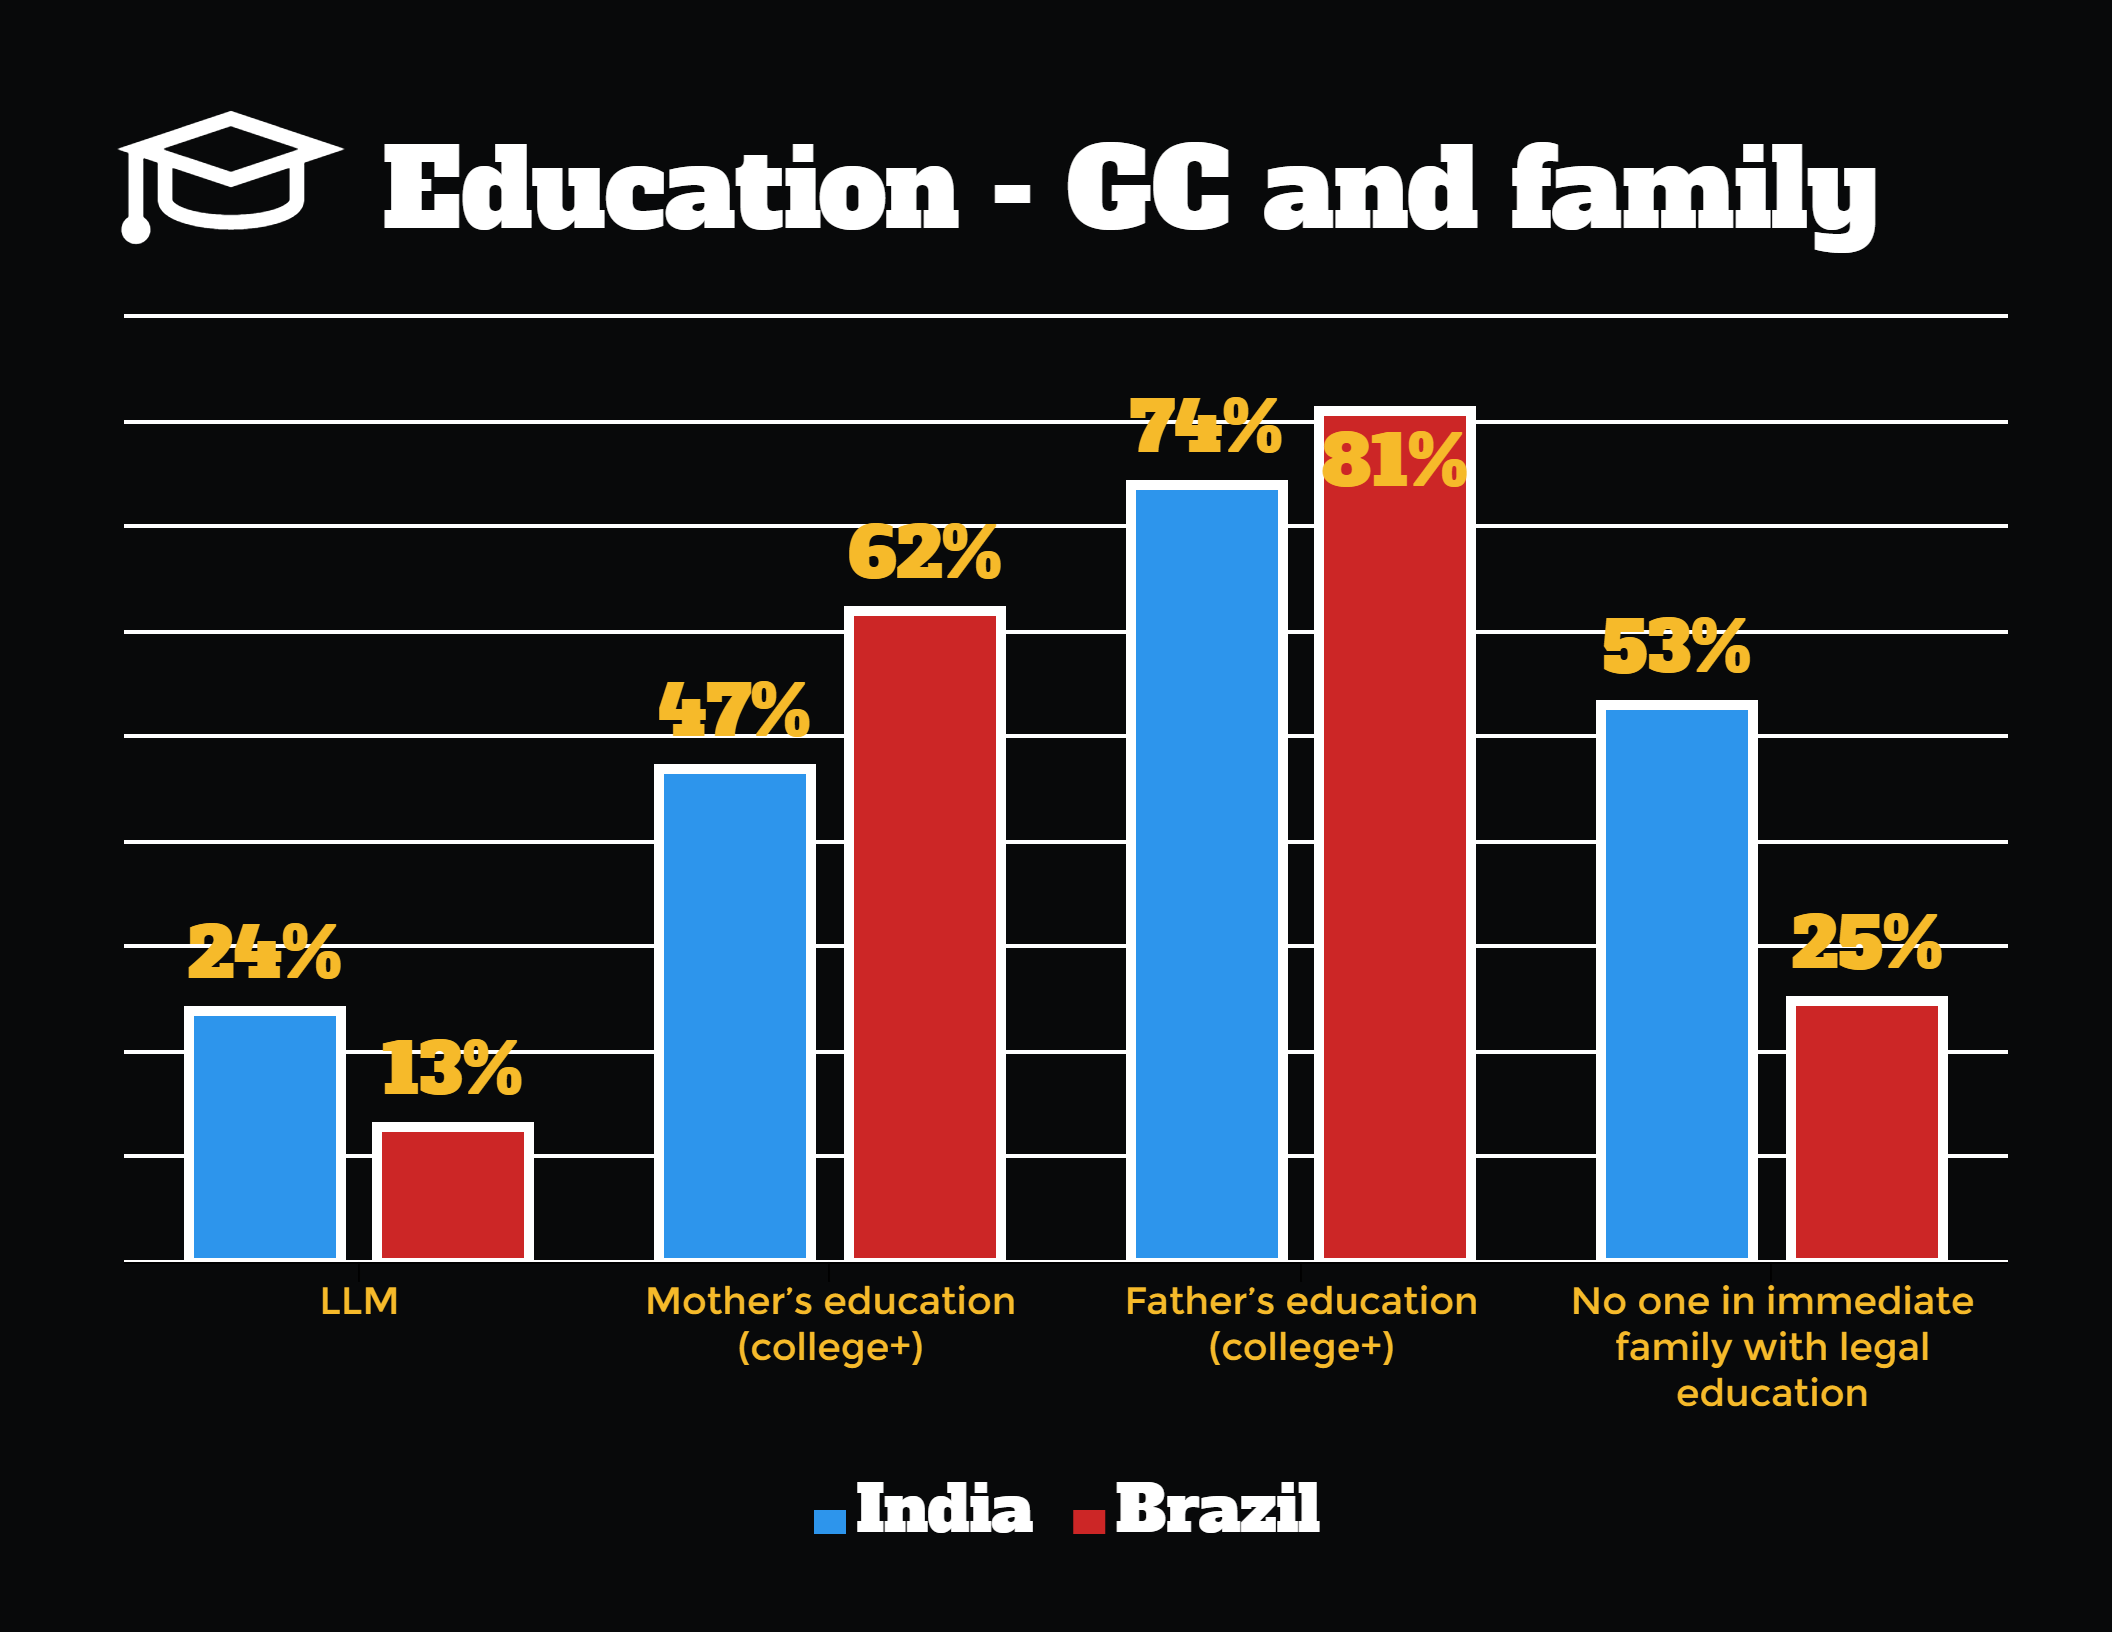 Level of education attainment between GC and their family members in India and Brazil.